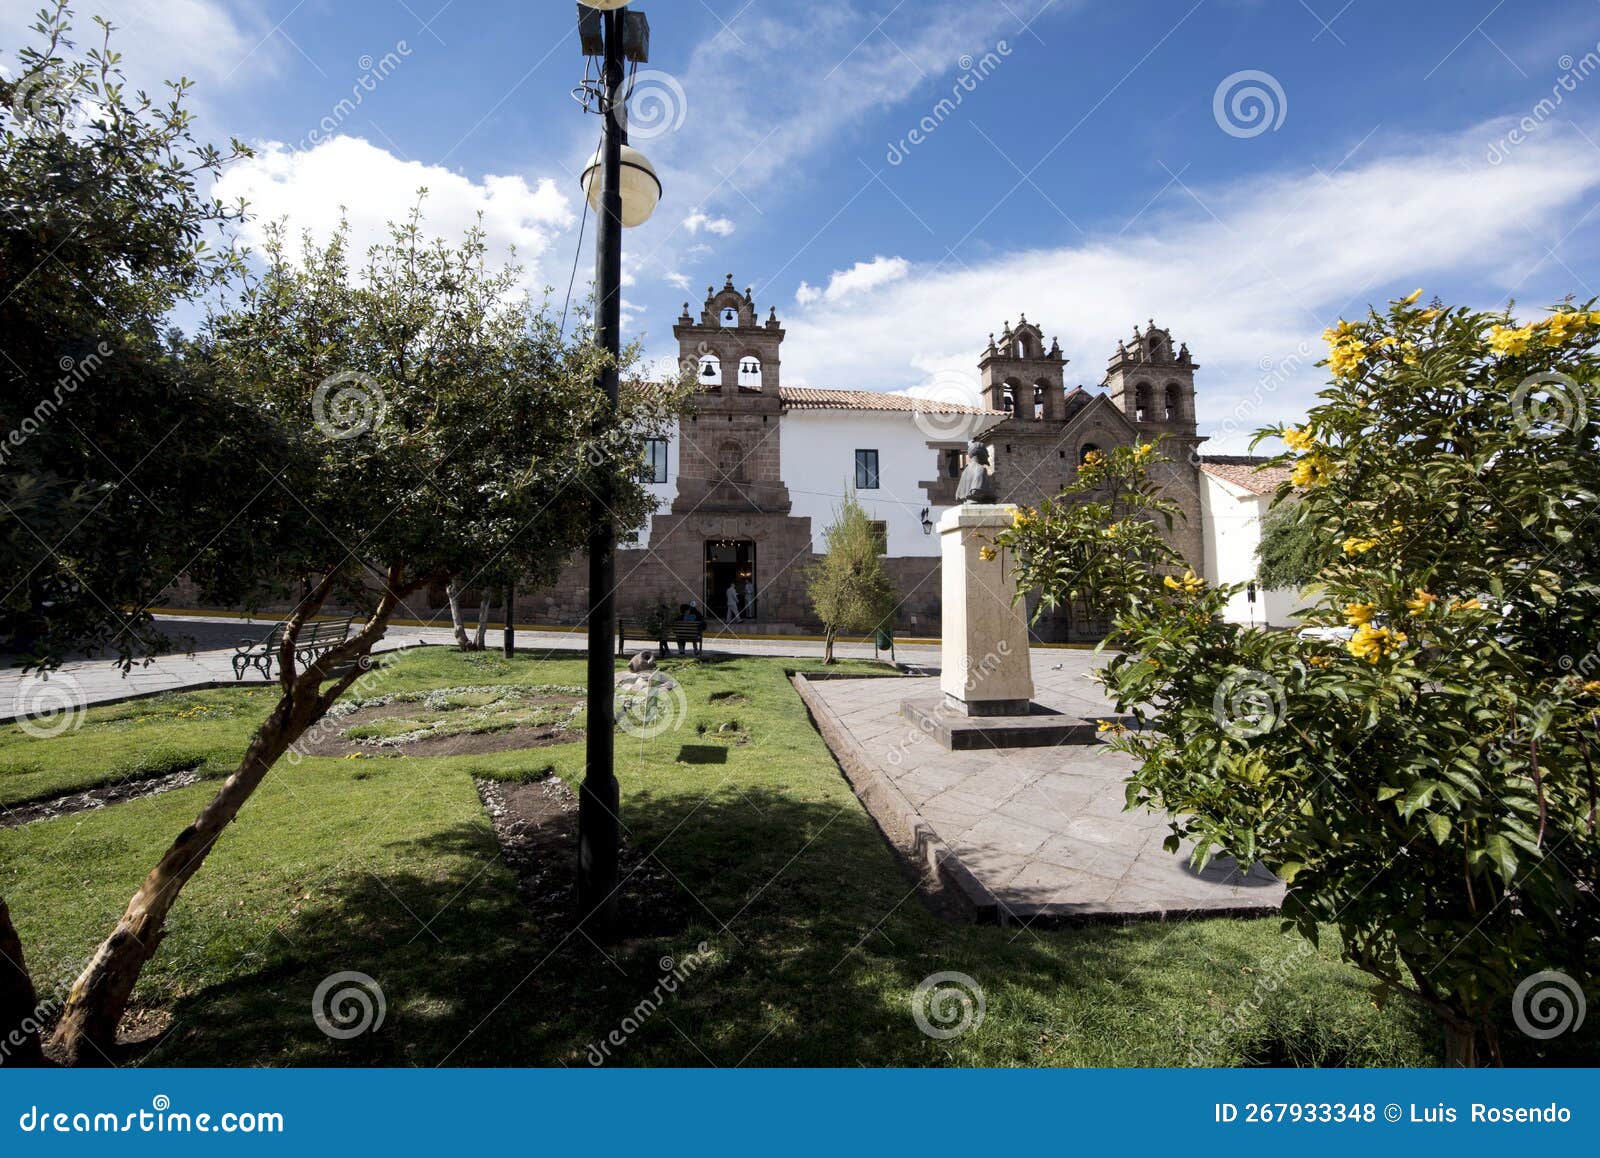 cusco, peru -: historic monastery in cusco, peru that now forms part of the luxury belmond hotel monasterio. the